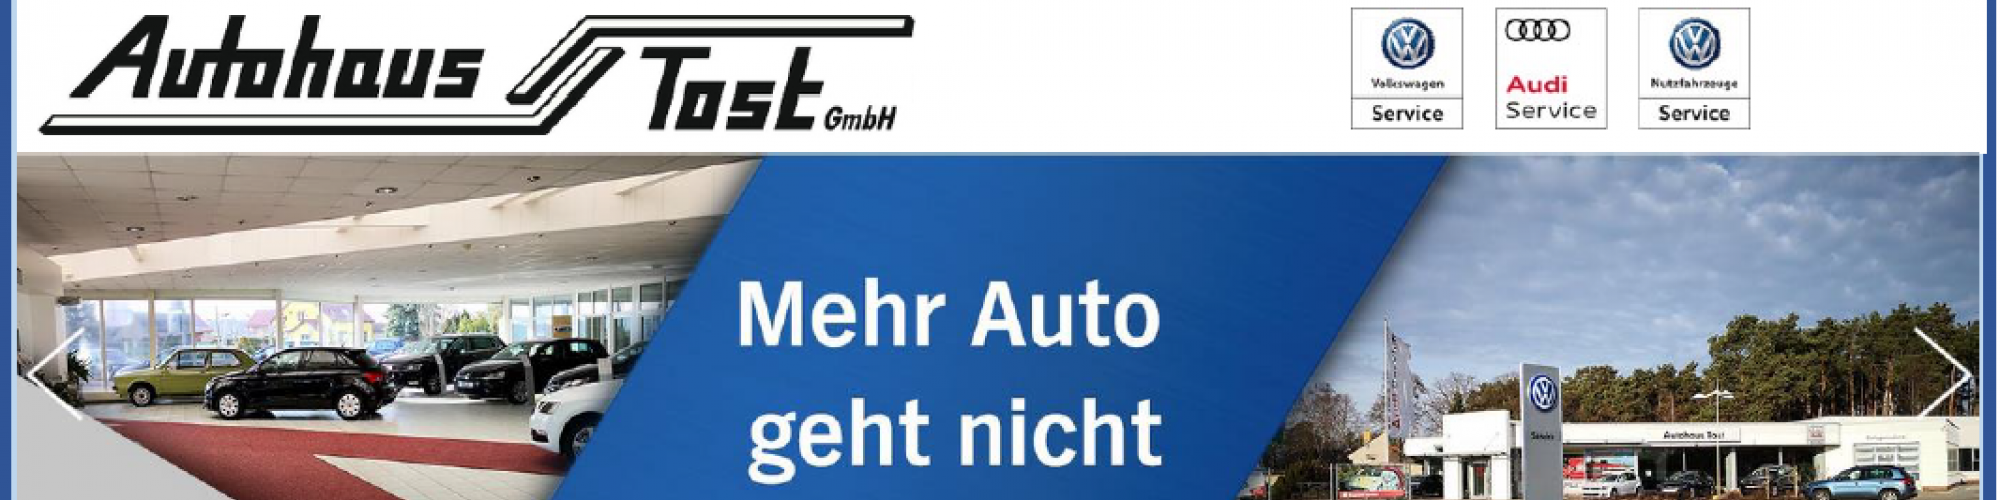 Autohaus Tost GmbH